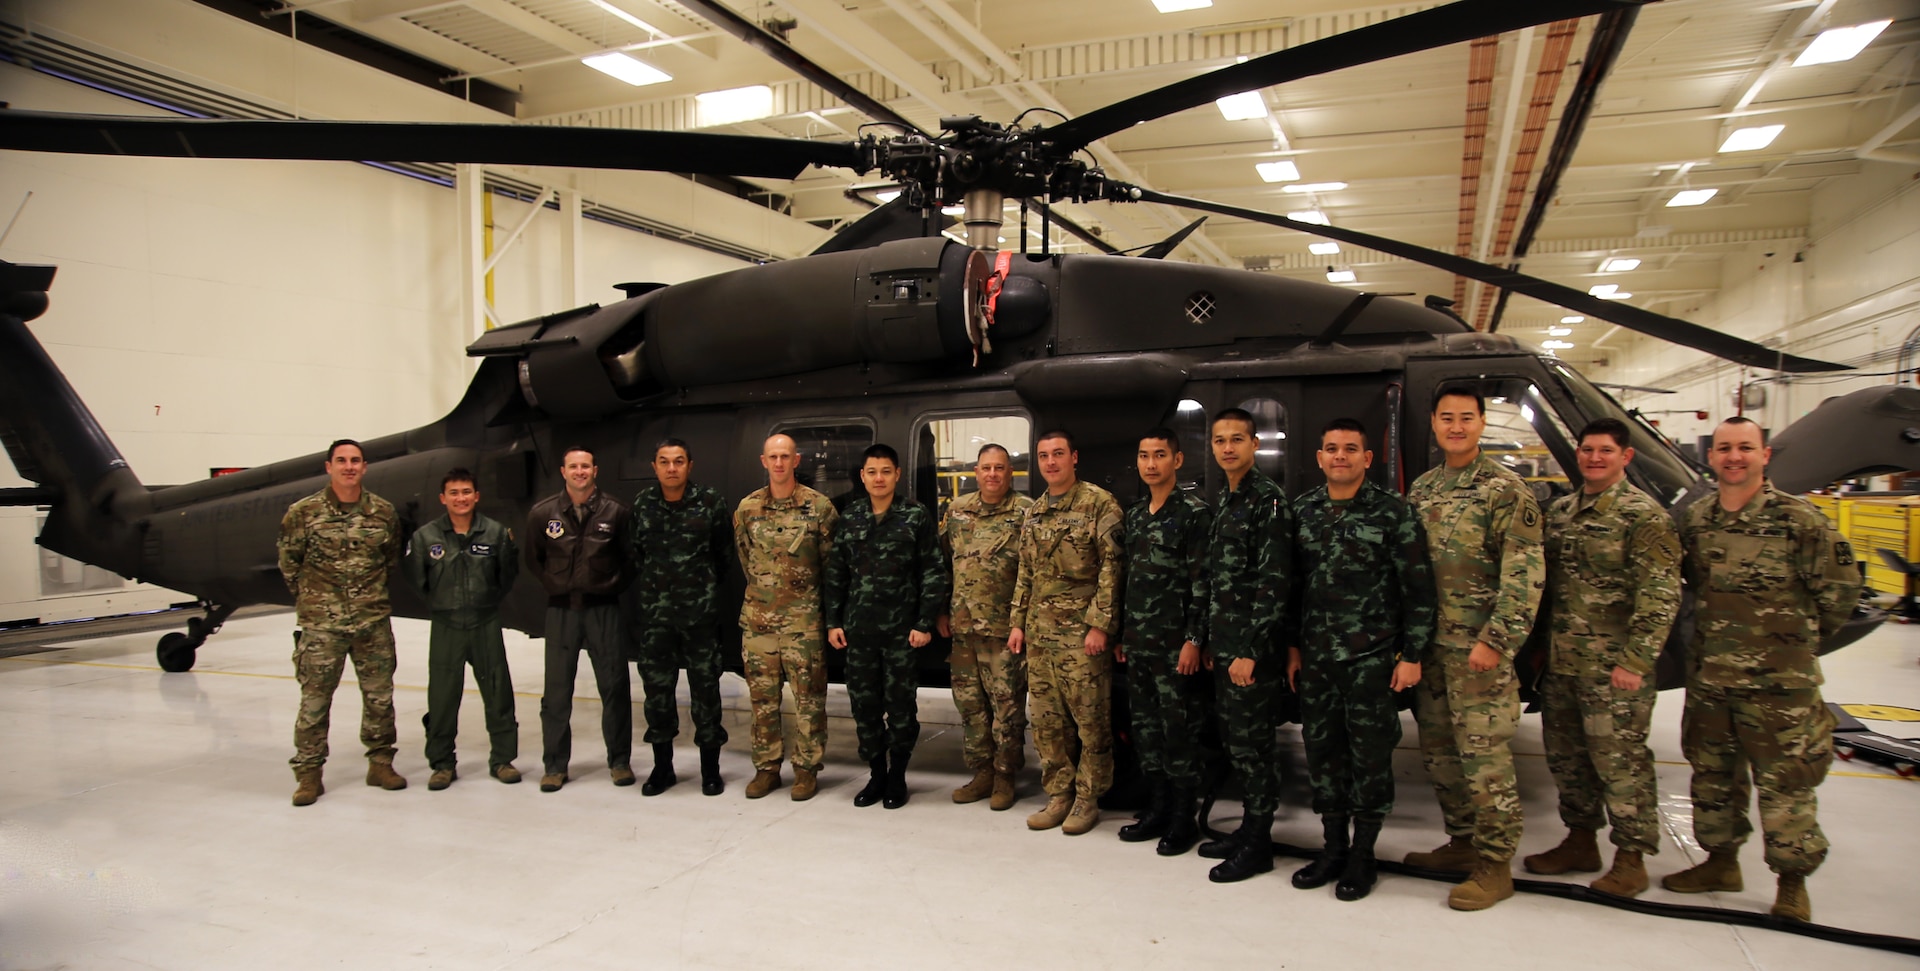 Members of the Royal Thai Army and Washington National Guard during the Military Operations Other than War exchange Nov. 21, 2019, at the Army Aviation Support Facility, Joint Base Lewis-McChord, Wash.